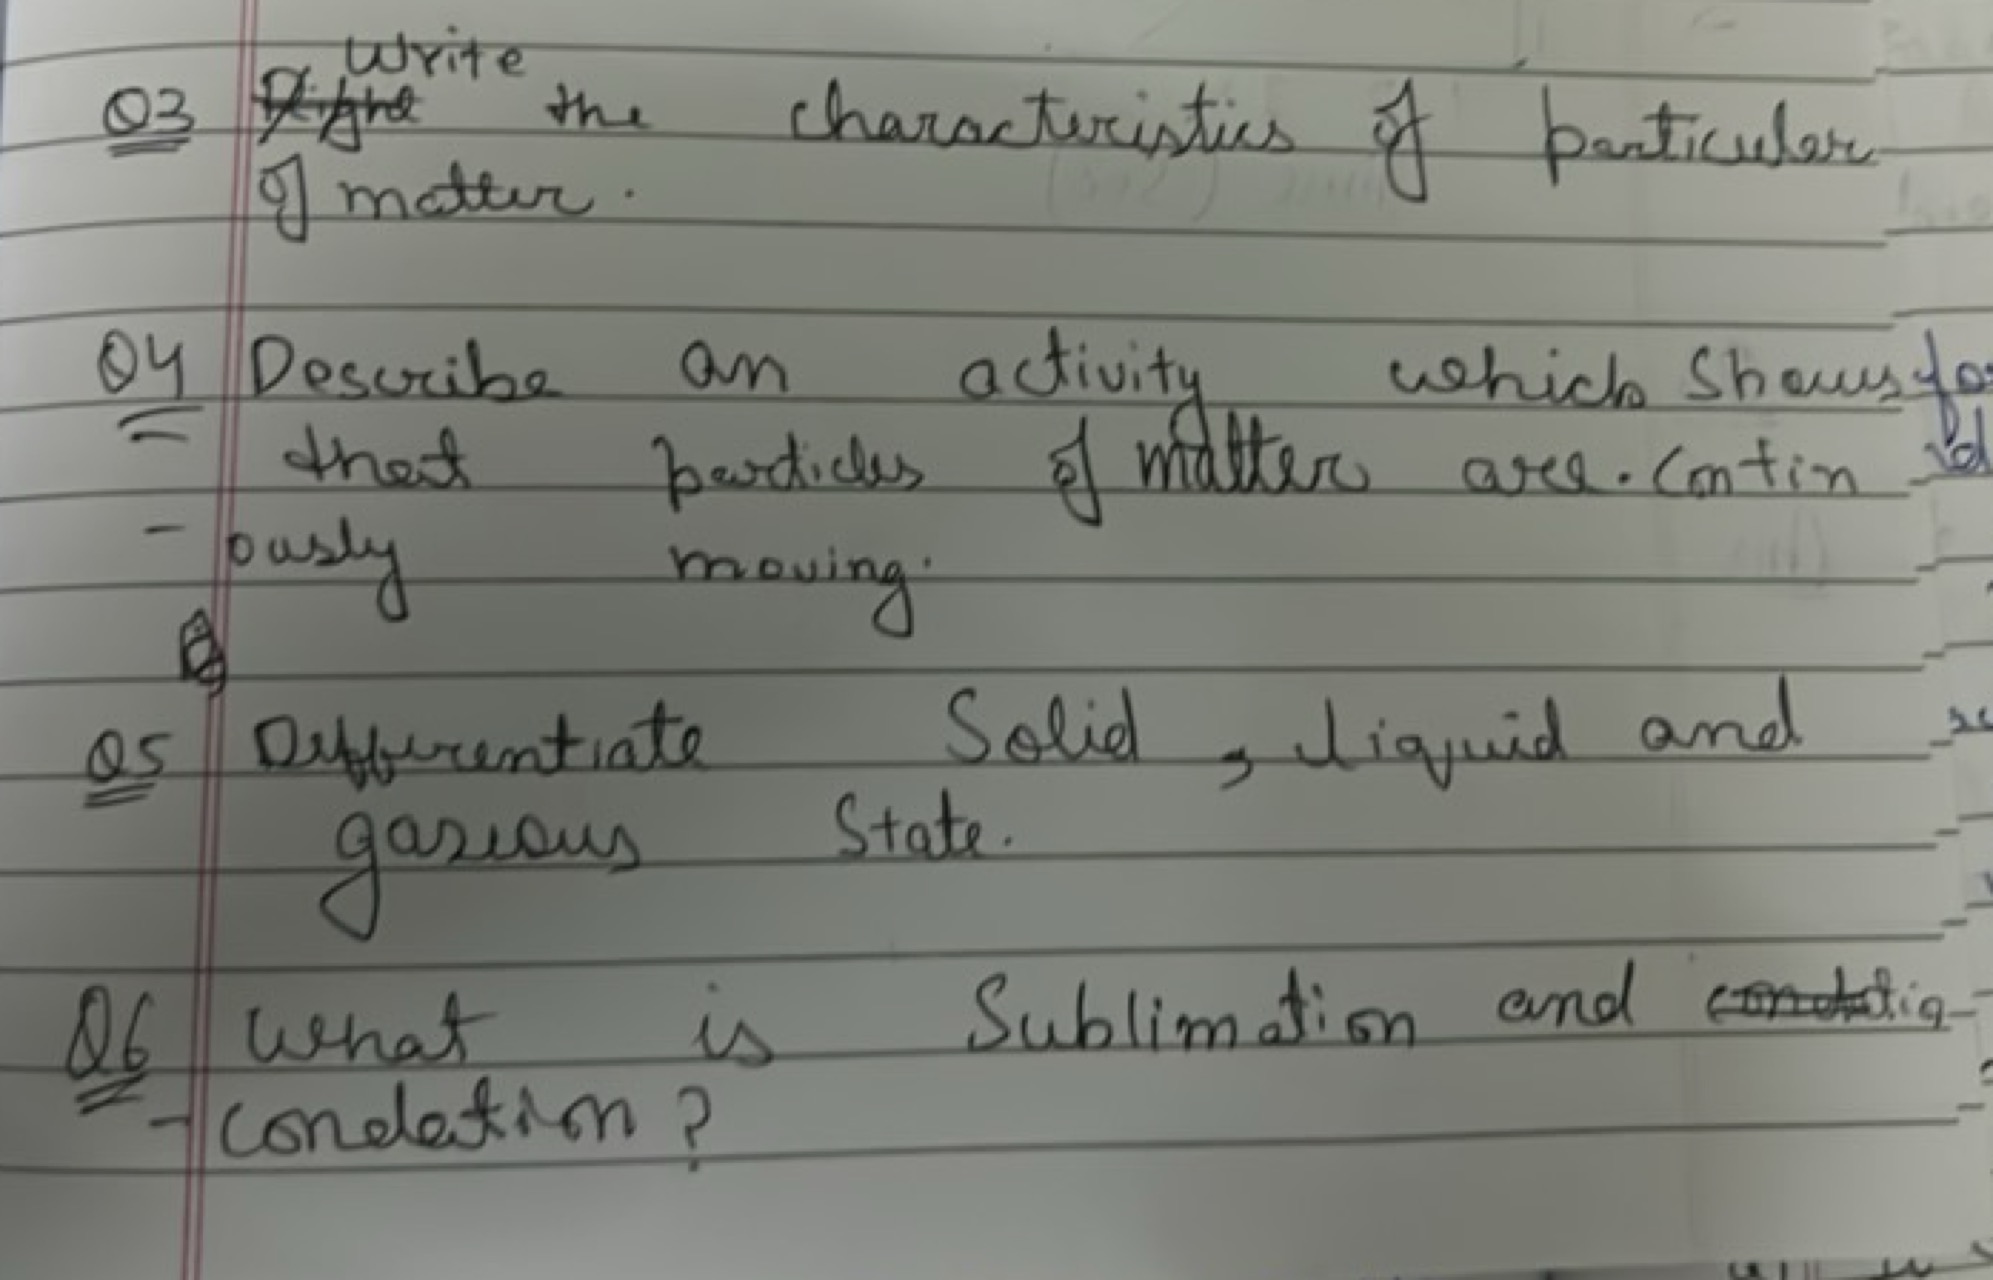 Q3 Fight the characteristics of particular of mater.